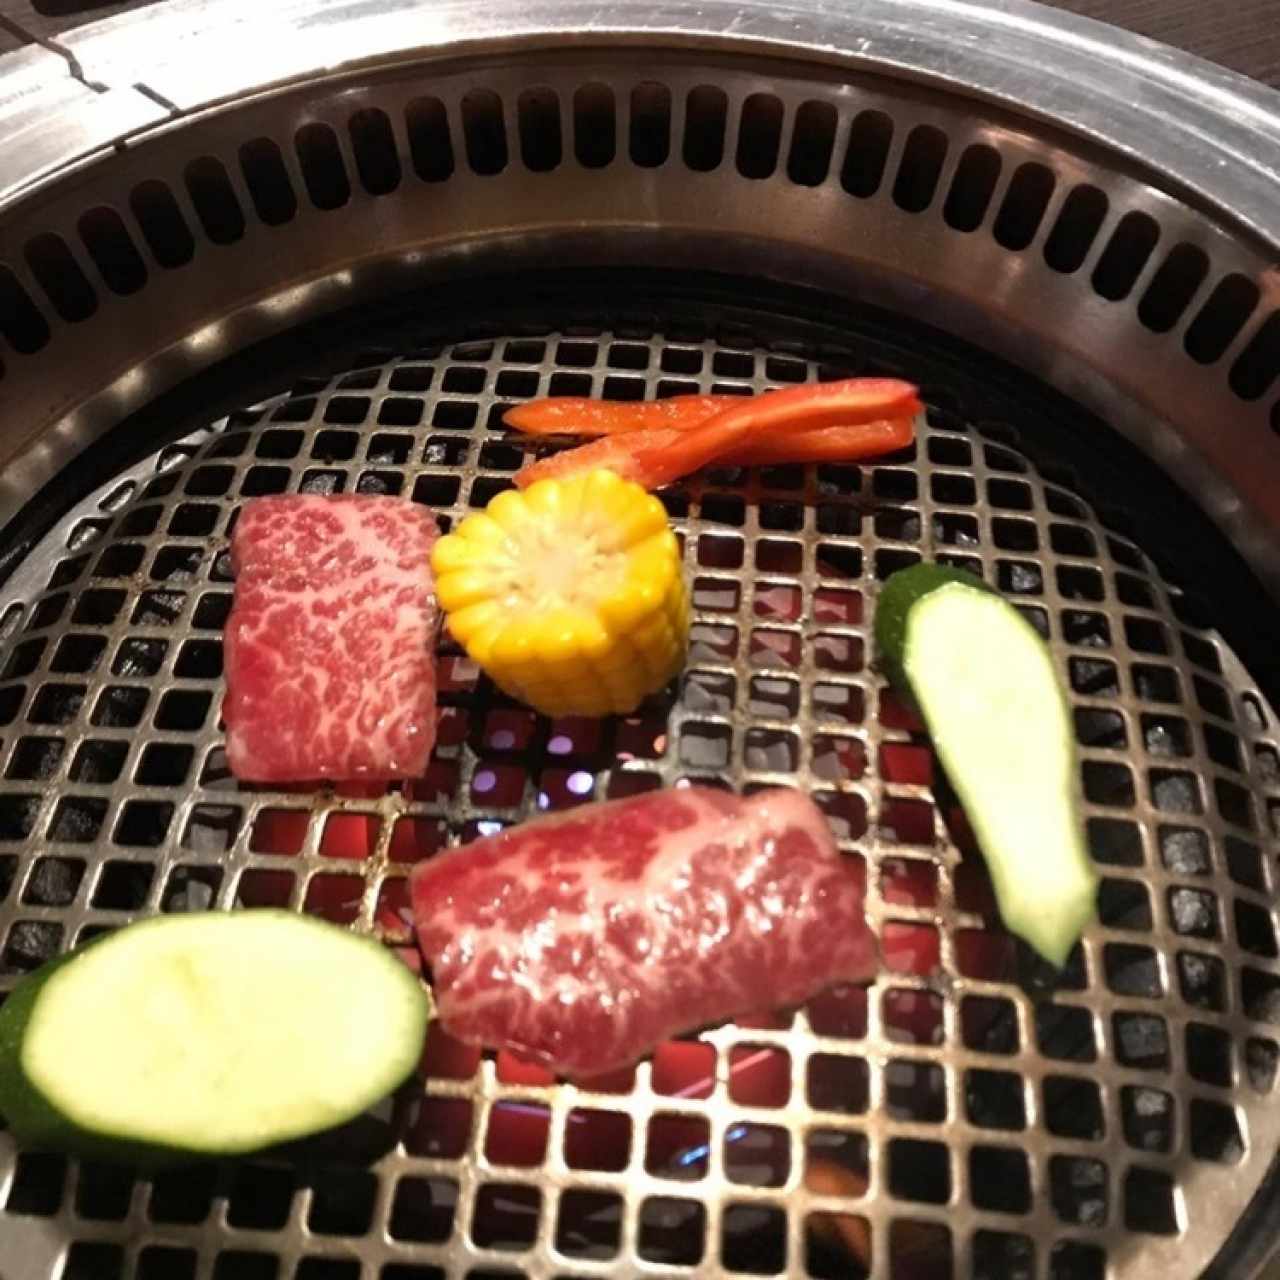 THE GRILL - A5 WAGYU BEEF